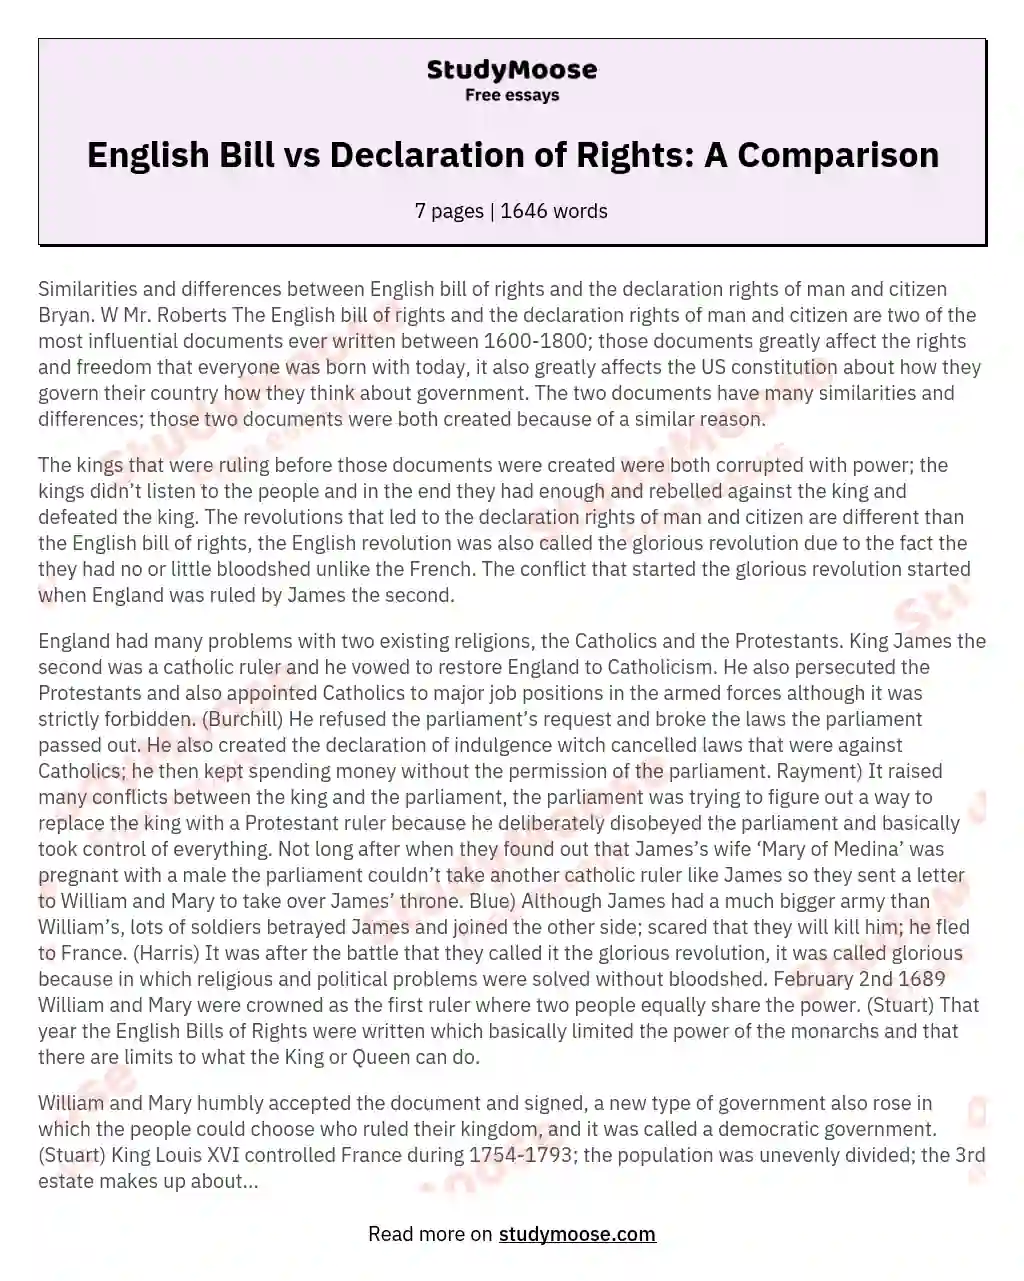 Similarities and Differences Between English Bill of Rights and the Declaration Rights of Man and Citizen